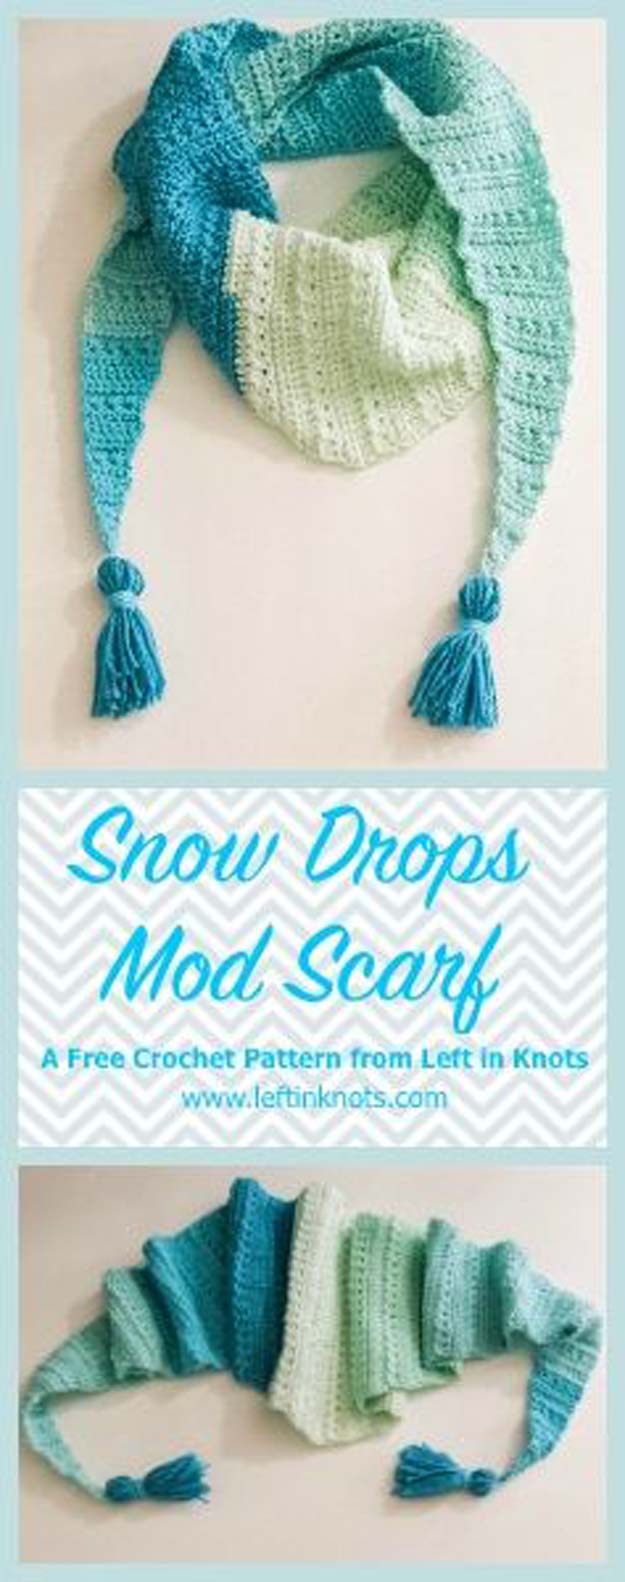 Crochet Patterns and Projects for Teens - Snow Drop Mod Scarf - Best Free Patterns and Tutorials for Crocheting Cute DIY Gifts, Room Decor and Accessories - How To for Beginners - Learn How To Make a Headband, Scarf, Hat, Animals and Clothes DIY Projects and Crafts for Teenagers #crochet #crafts #teencrafts #freecrochet #crochetpatterns